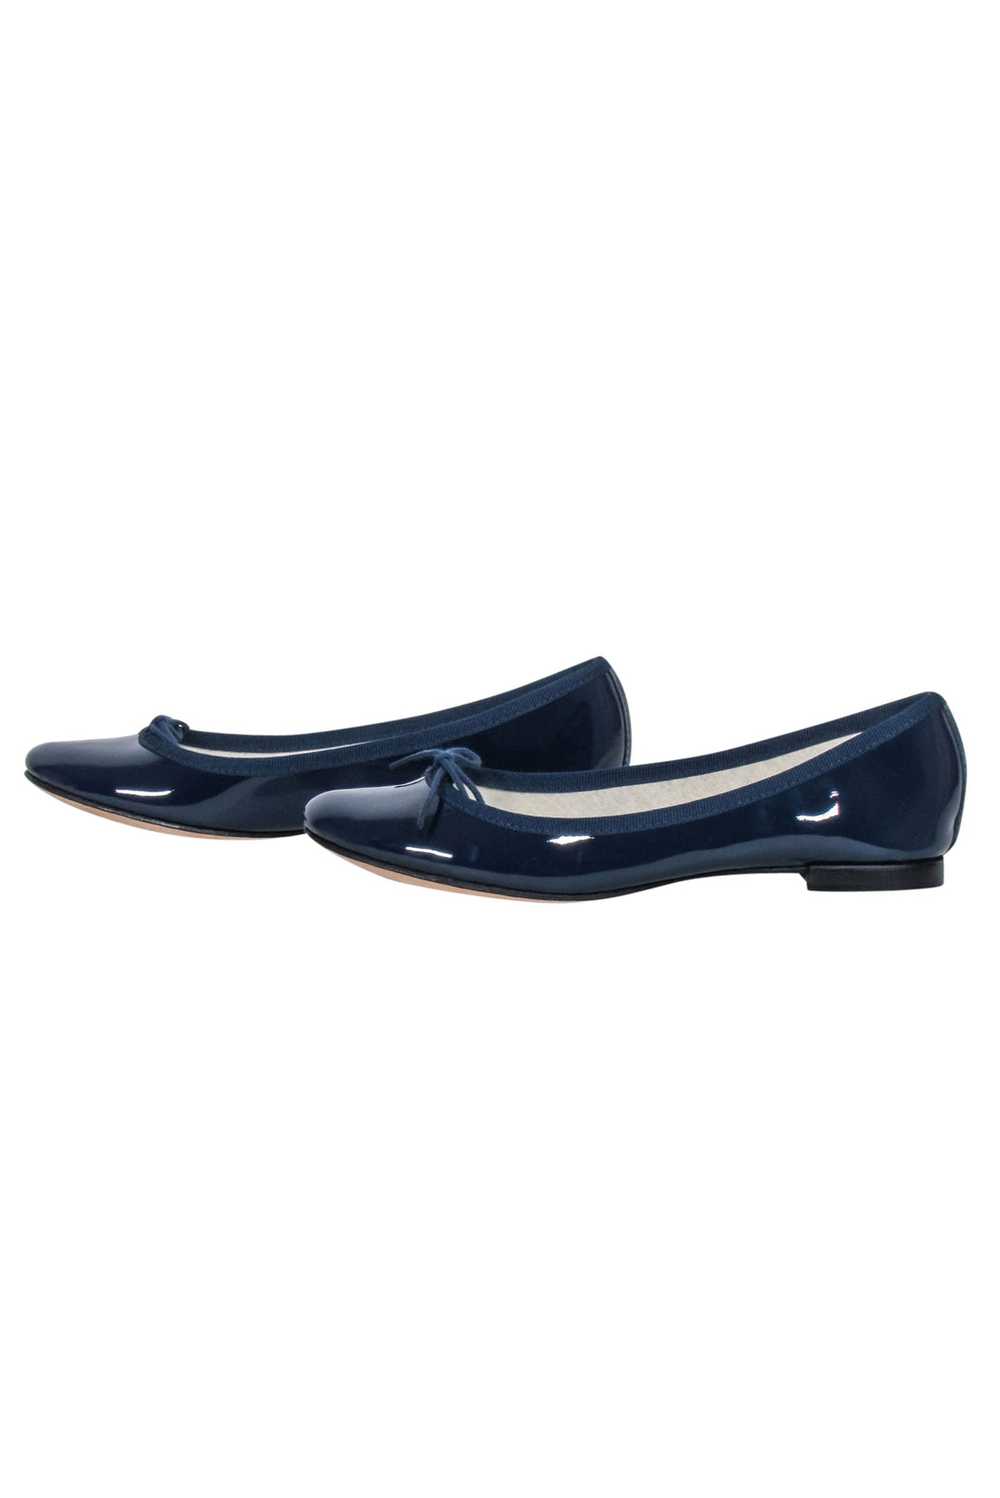 Repetto - Navy Patent Leather "Cendrillon" Ballet… - image 3